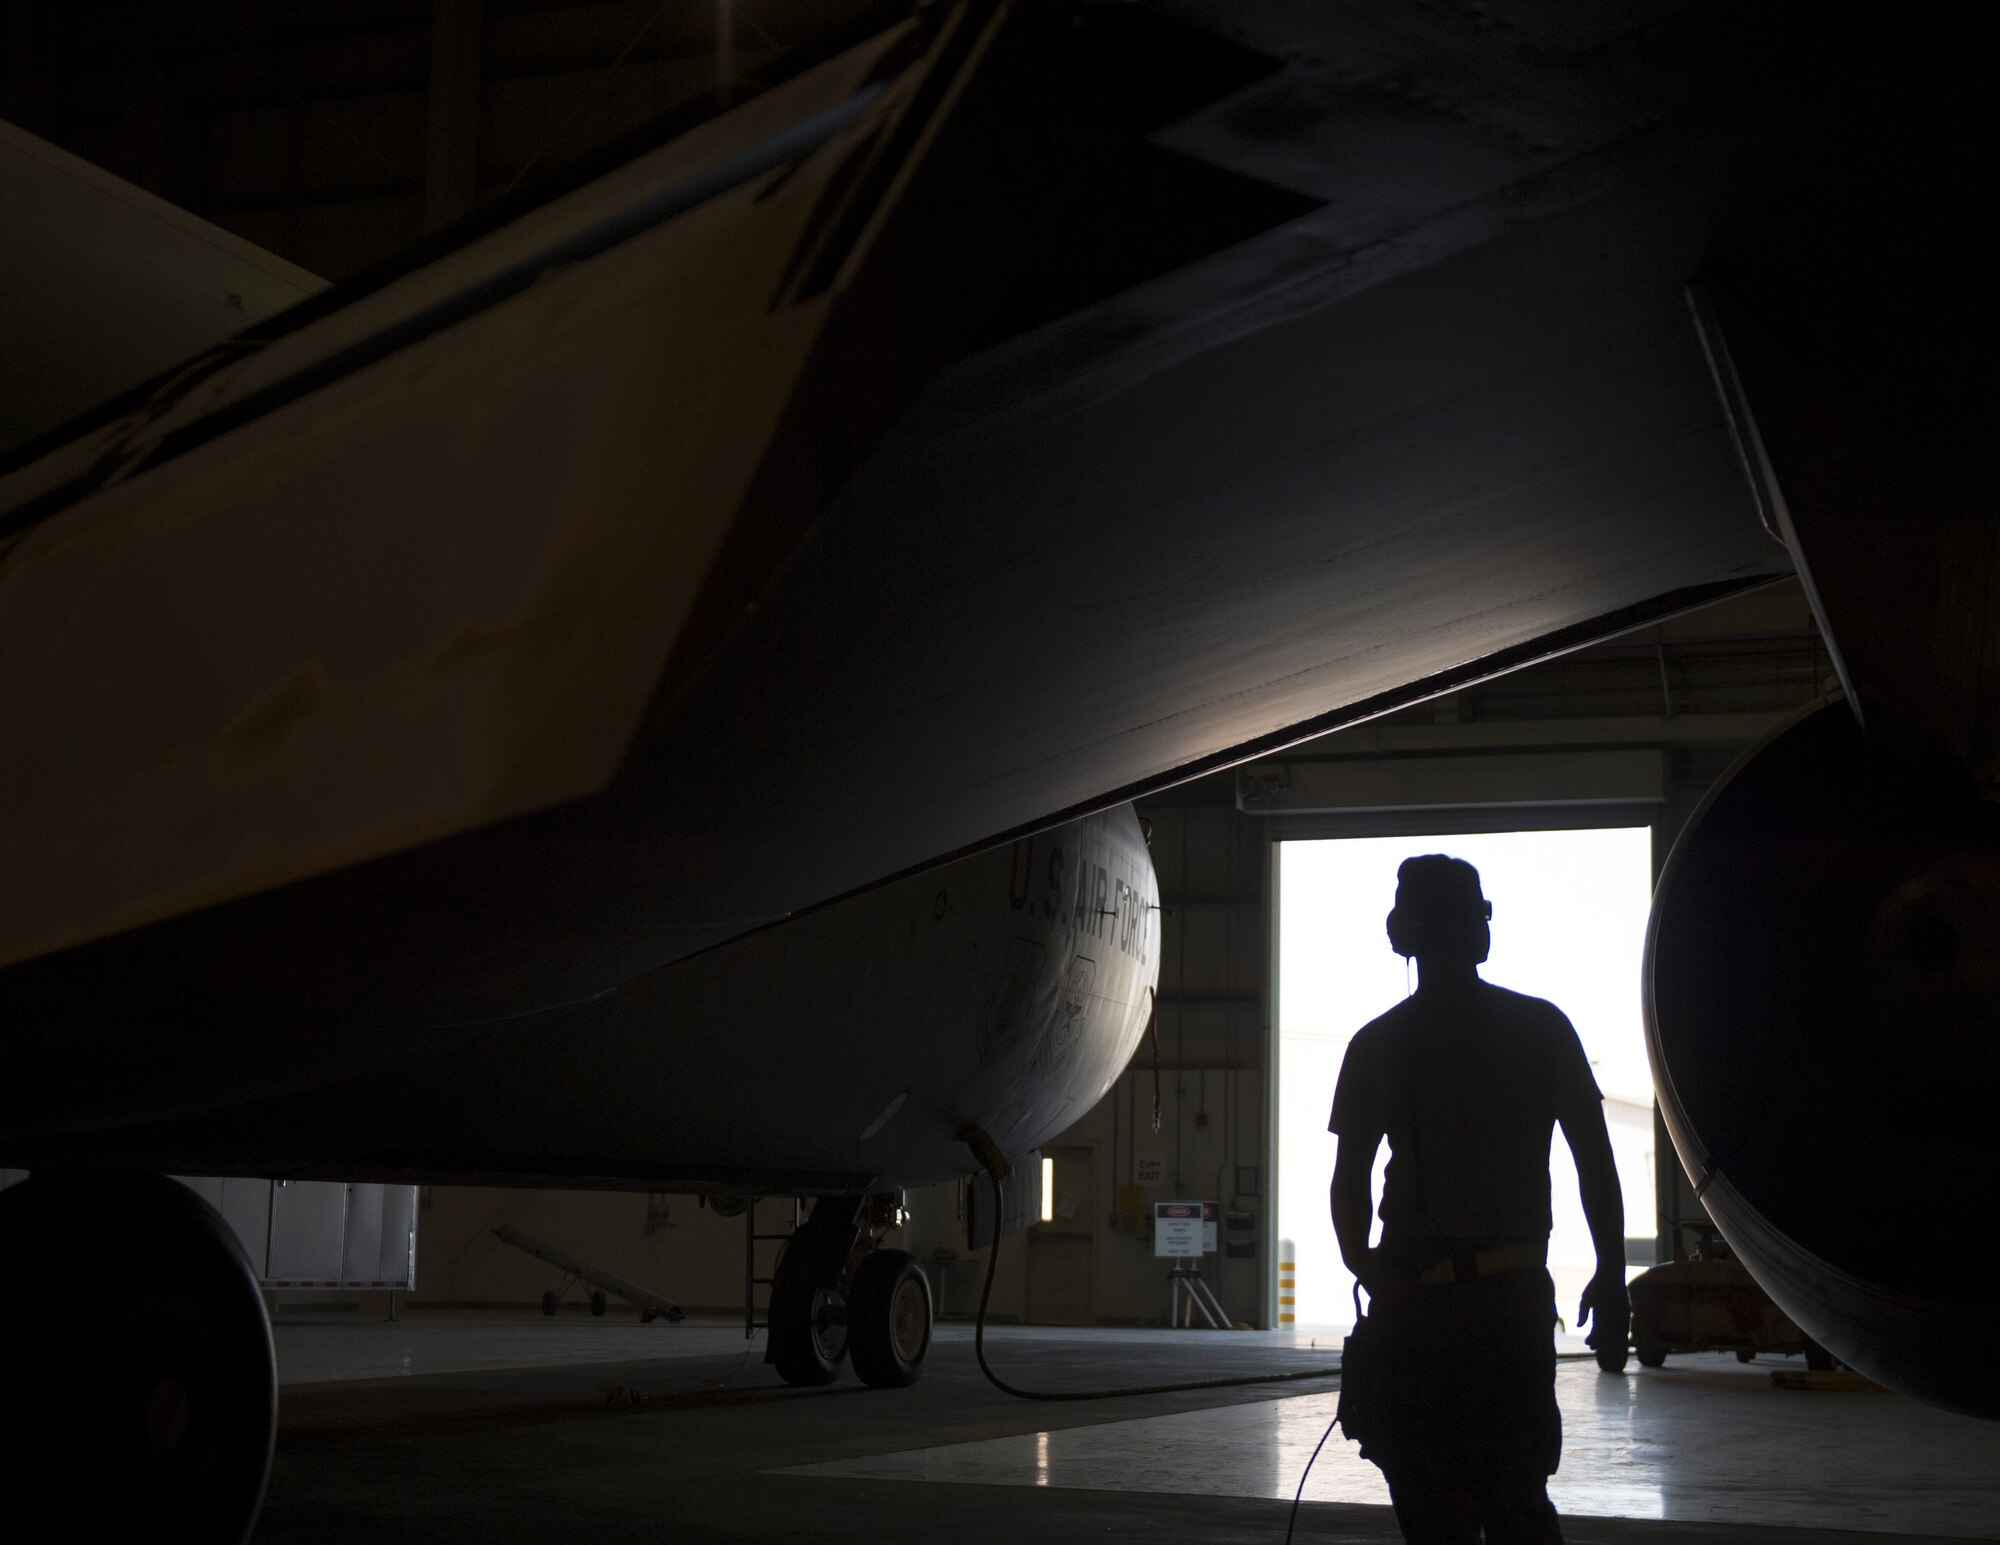 U.S. Air Force Tech. Sgt. Christian Runyon, fuel systems technician with the 379th Expeditionary Maintenance Squadron, watches the flaps go back up on a KC-135 Stratotanker after the gravity transfer valve operational check was completed at Al Udeid Air Base, Qatar, April 24, 2017. Completing the gravity transfer valve operational check helps ensure that the fuel system won’t malfunction during flight. (U.S. Air Force photo by Tech. Sgt. Amy M. Lovgren)